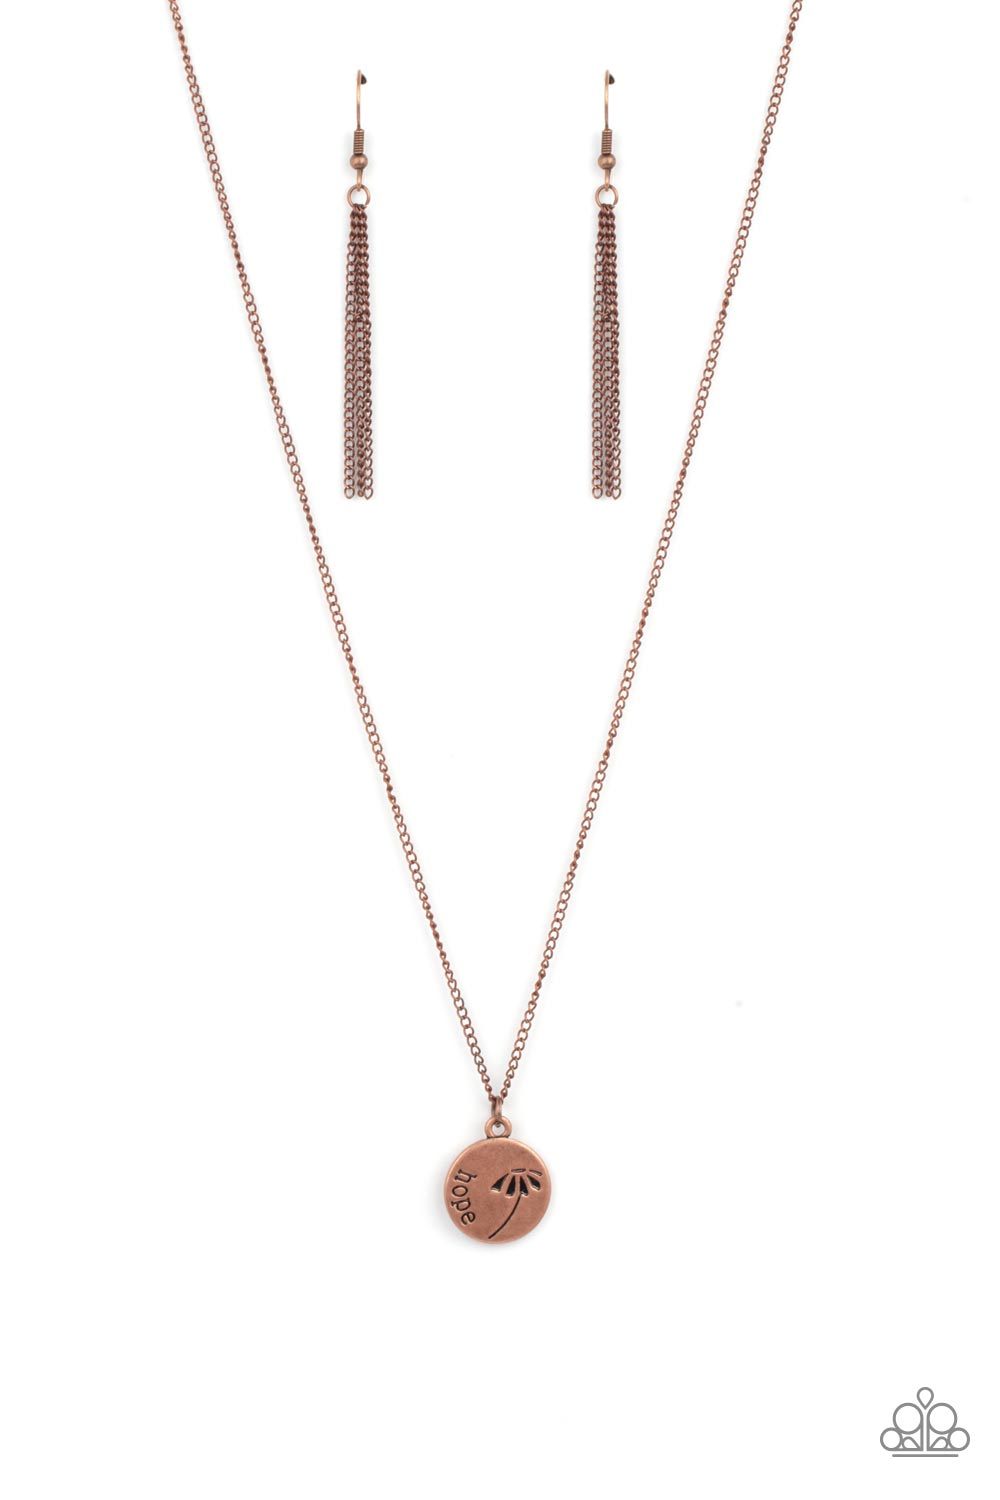 Hold On To Hope - copper - Paparazzi necklace